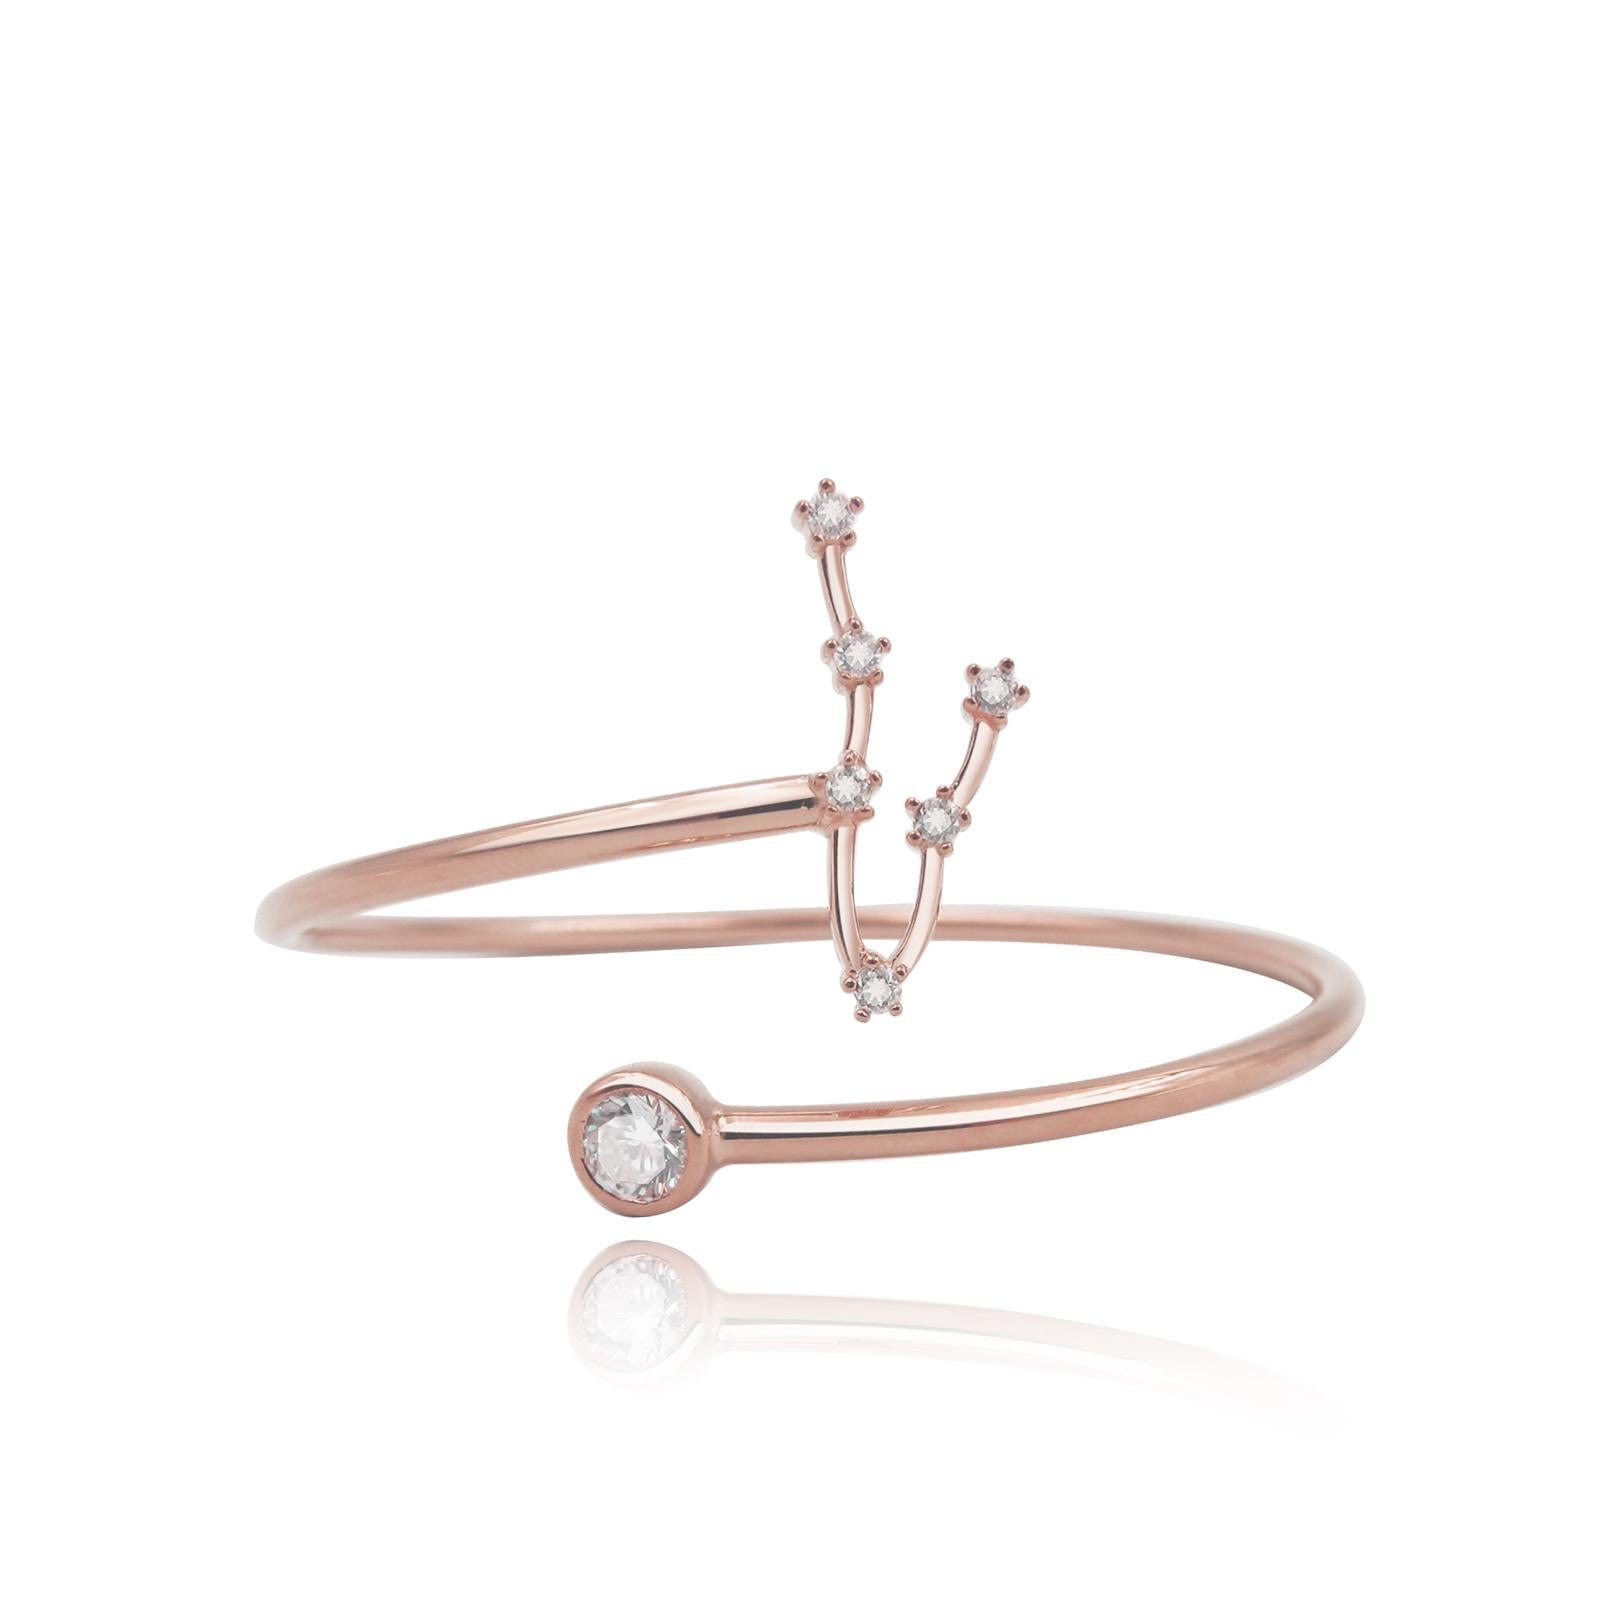 You are unique and your zodiac tells part of your story.  How your zodiac is displayed in the beautiful nighttime sky is what we want you to carry with you always. This pisces constellation wire bezel cuff shares a part of your personality with us